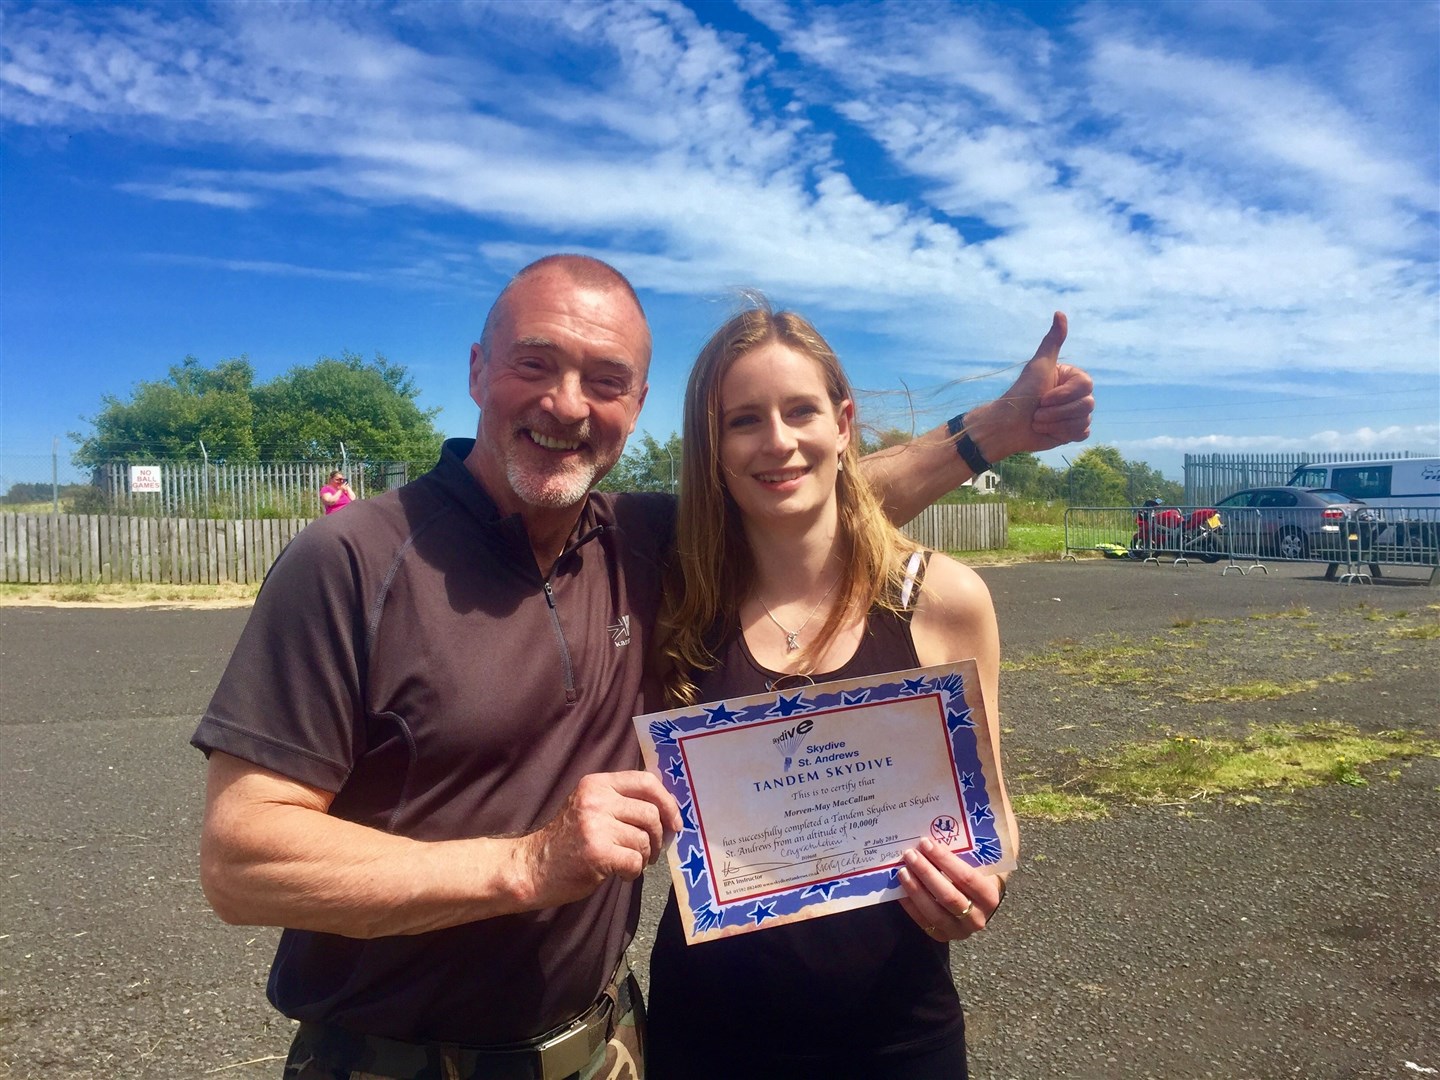 Morven-May MacCallum took the plunge in a tandem leap with instructor Ricky Capanni.